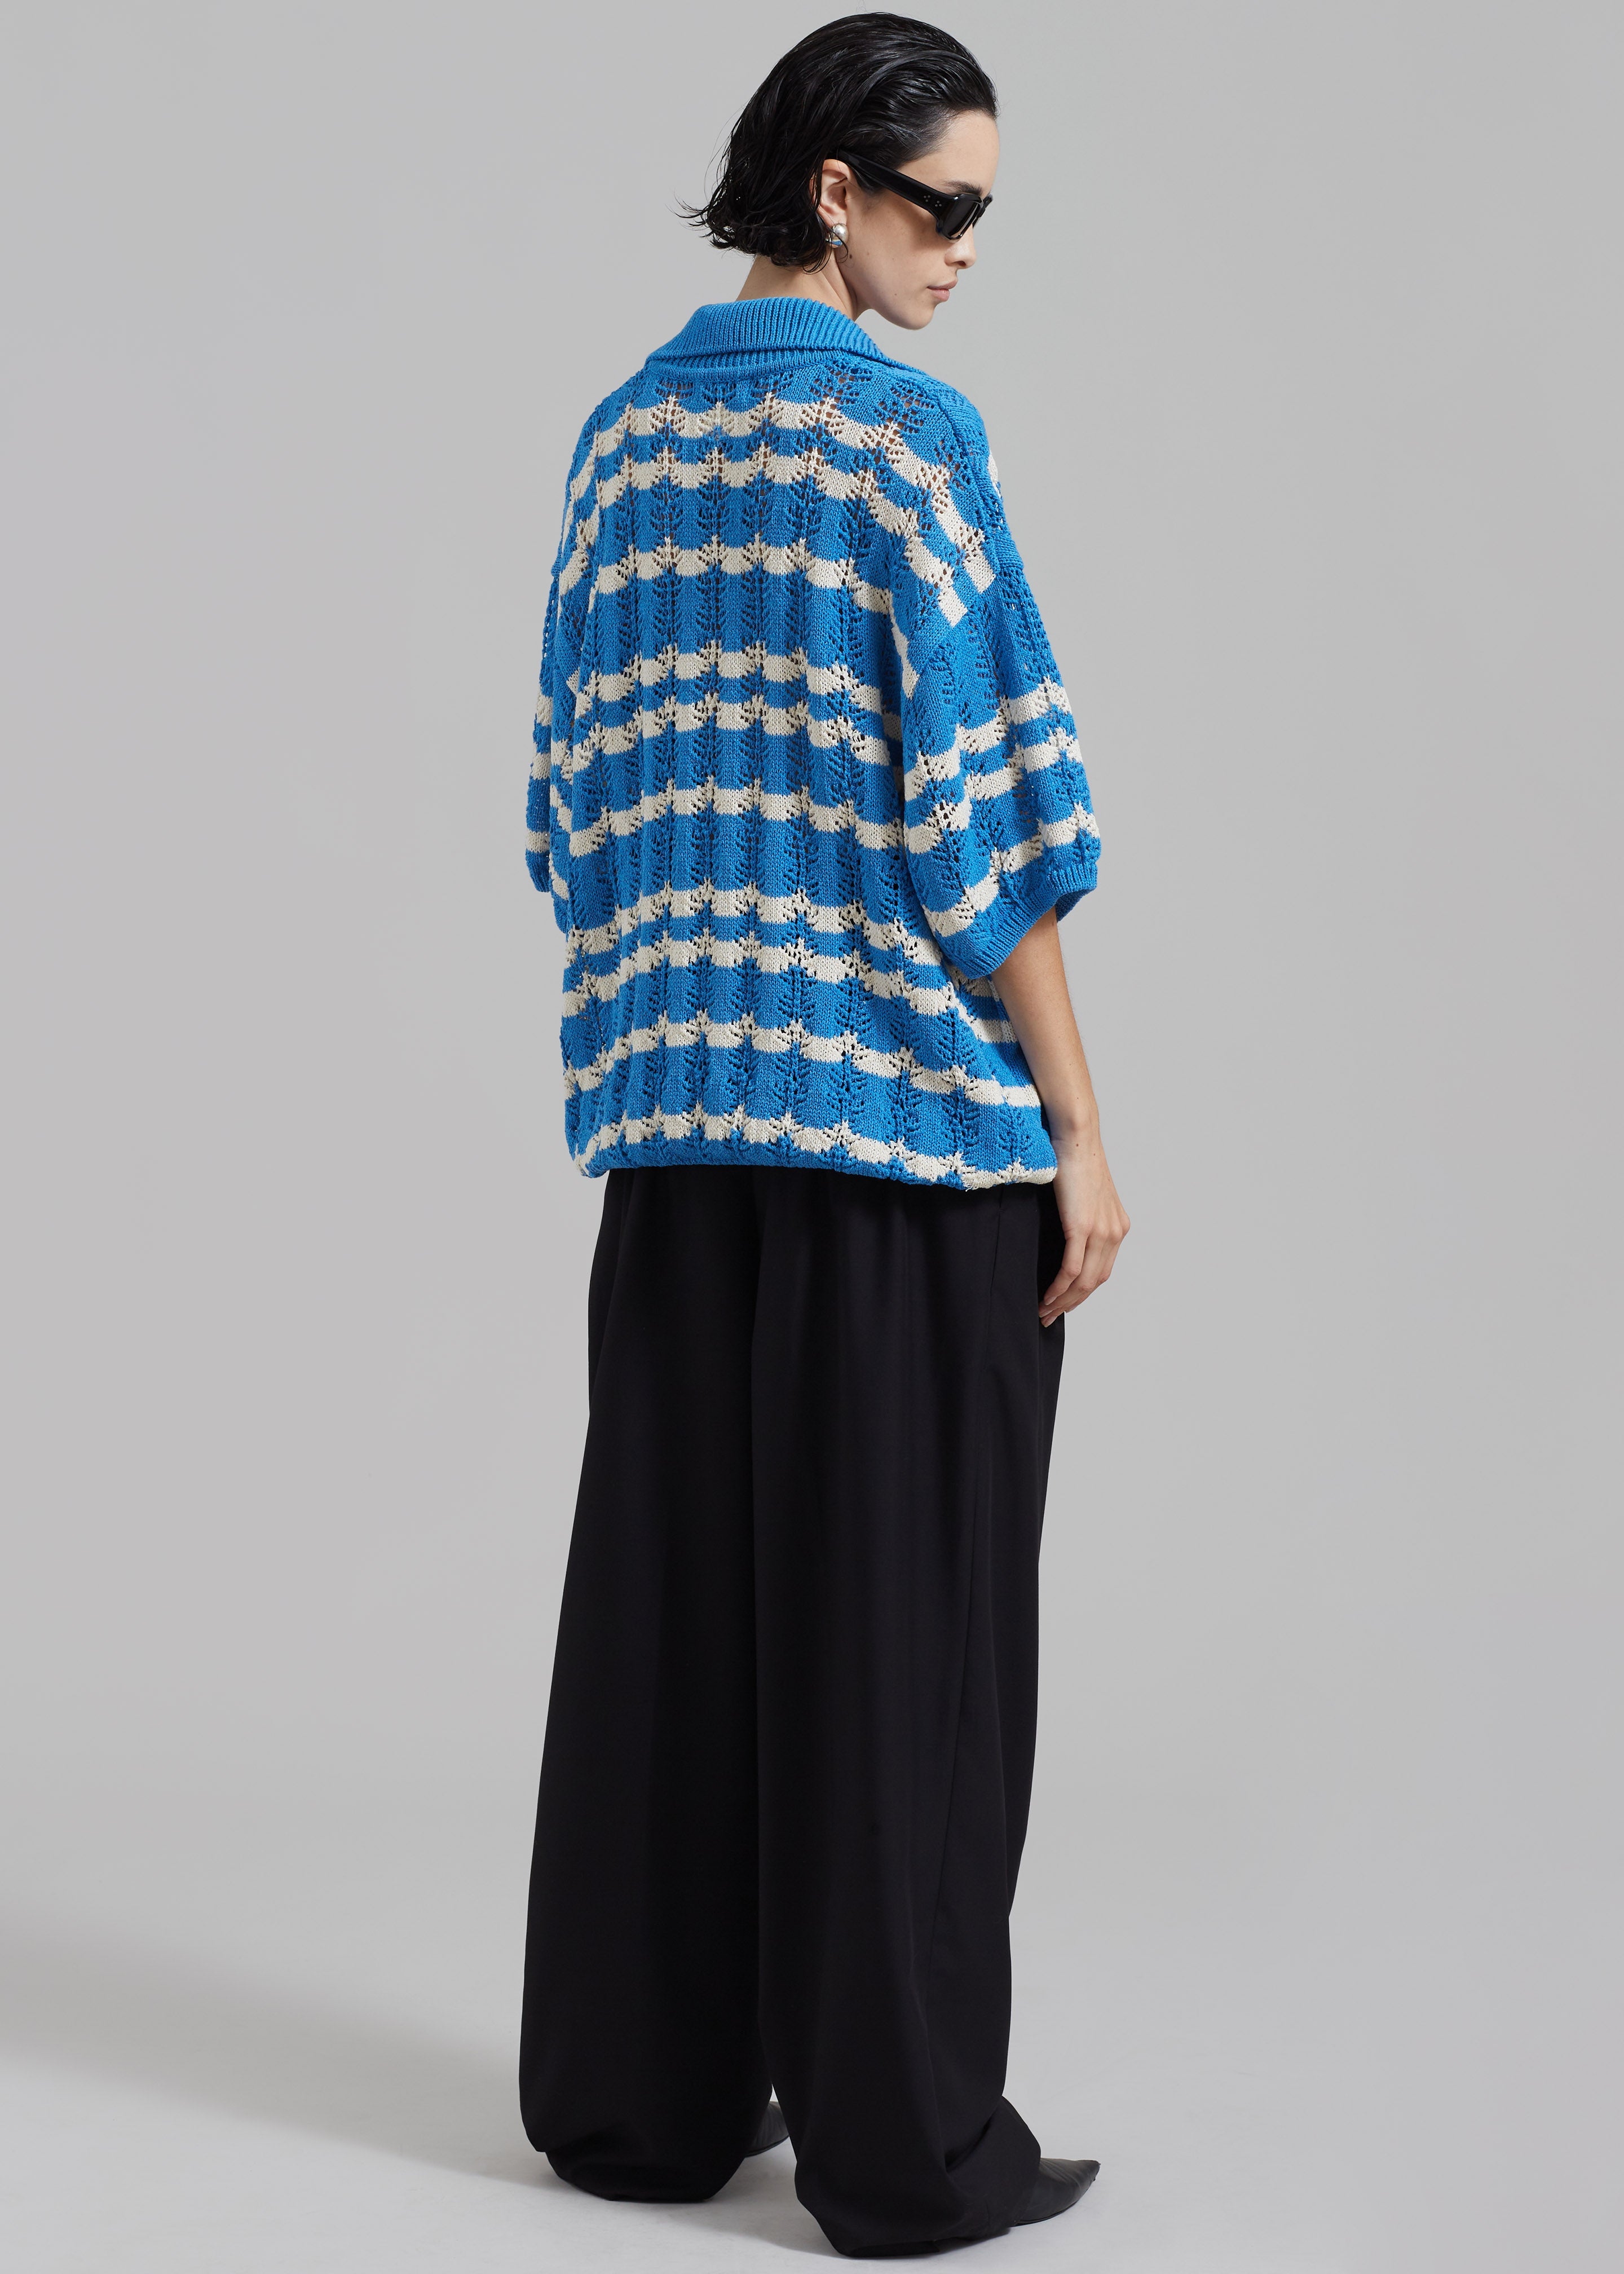 Lucca Knitted Top - Blue - 9